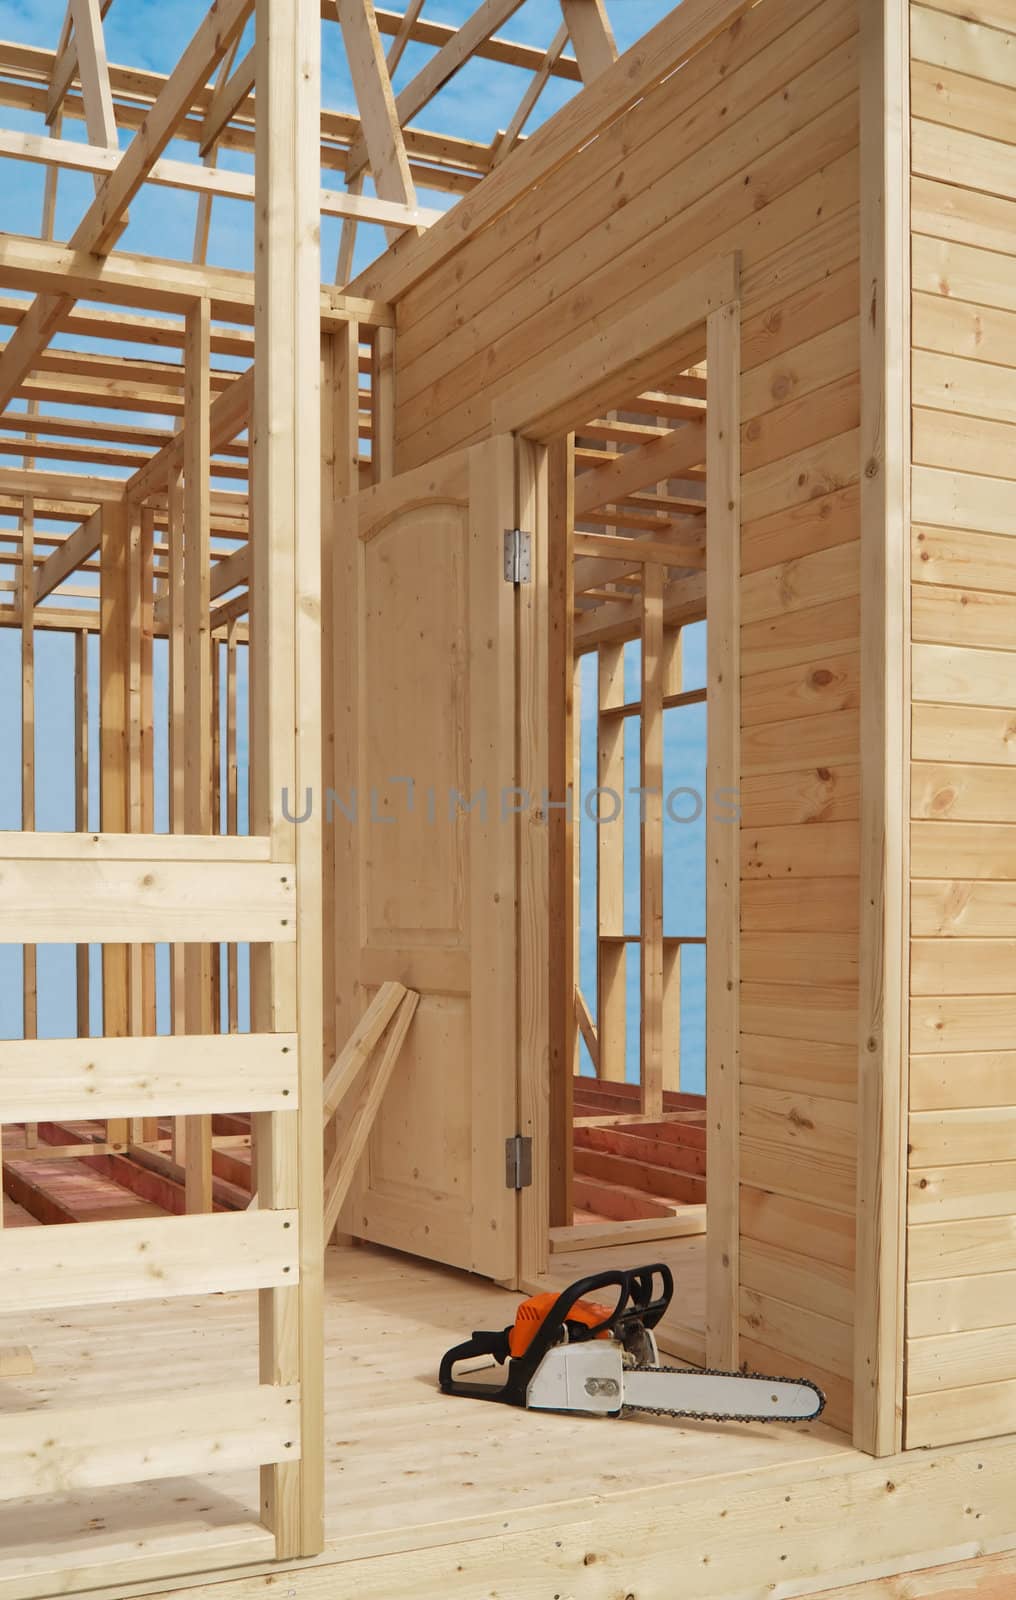 Construction of wooden frame houses